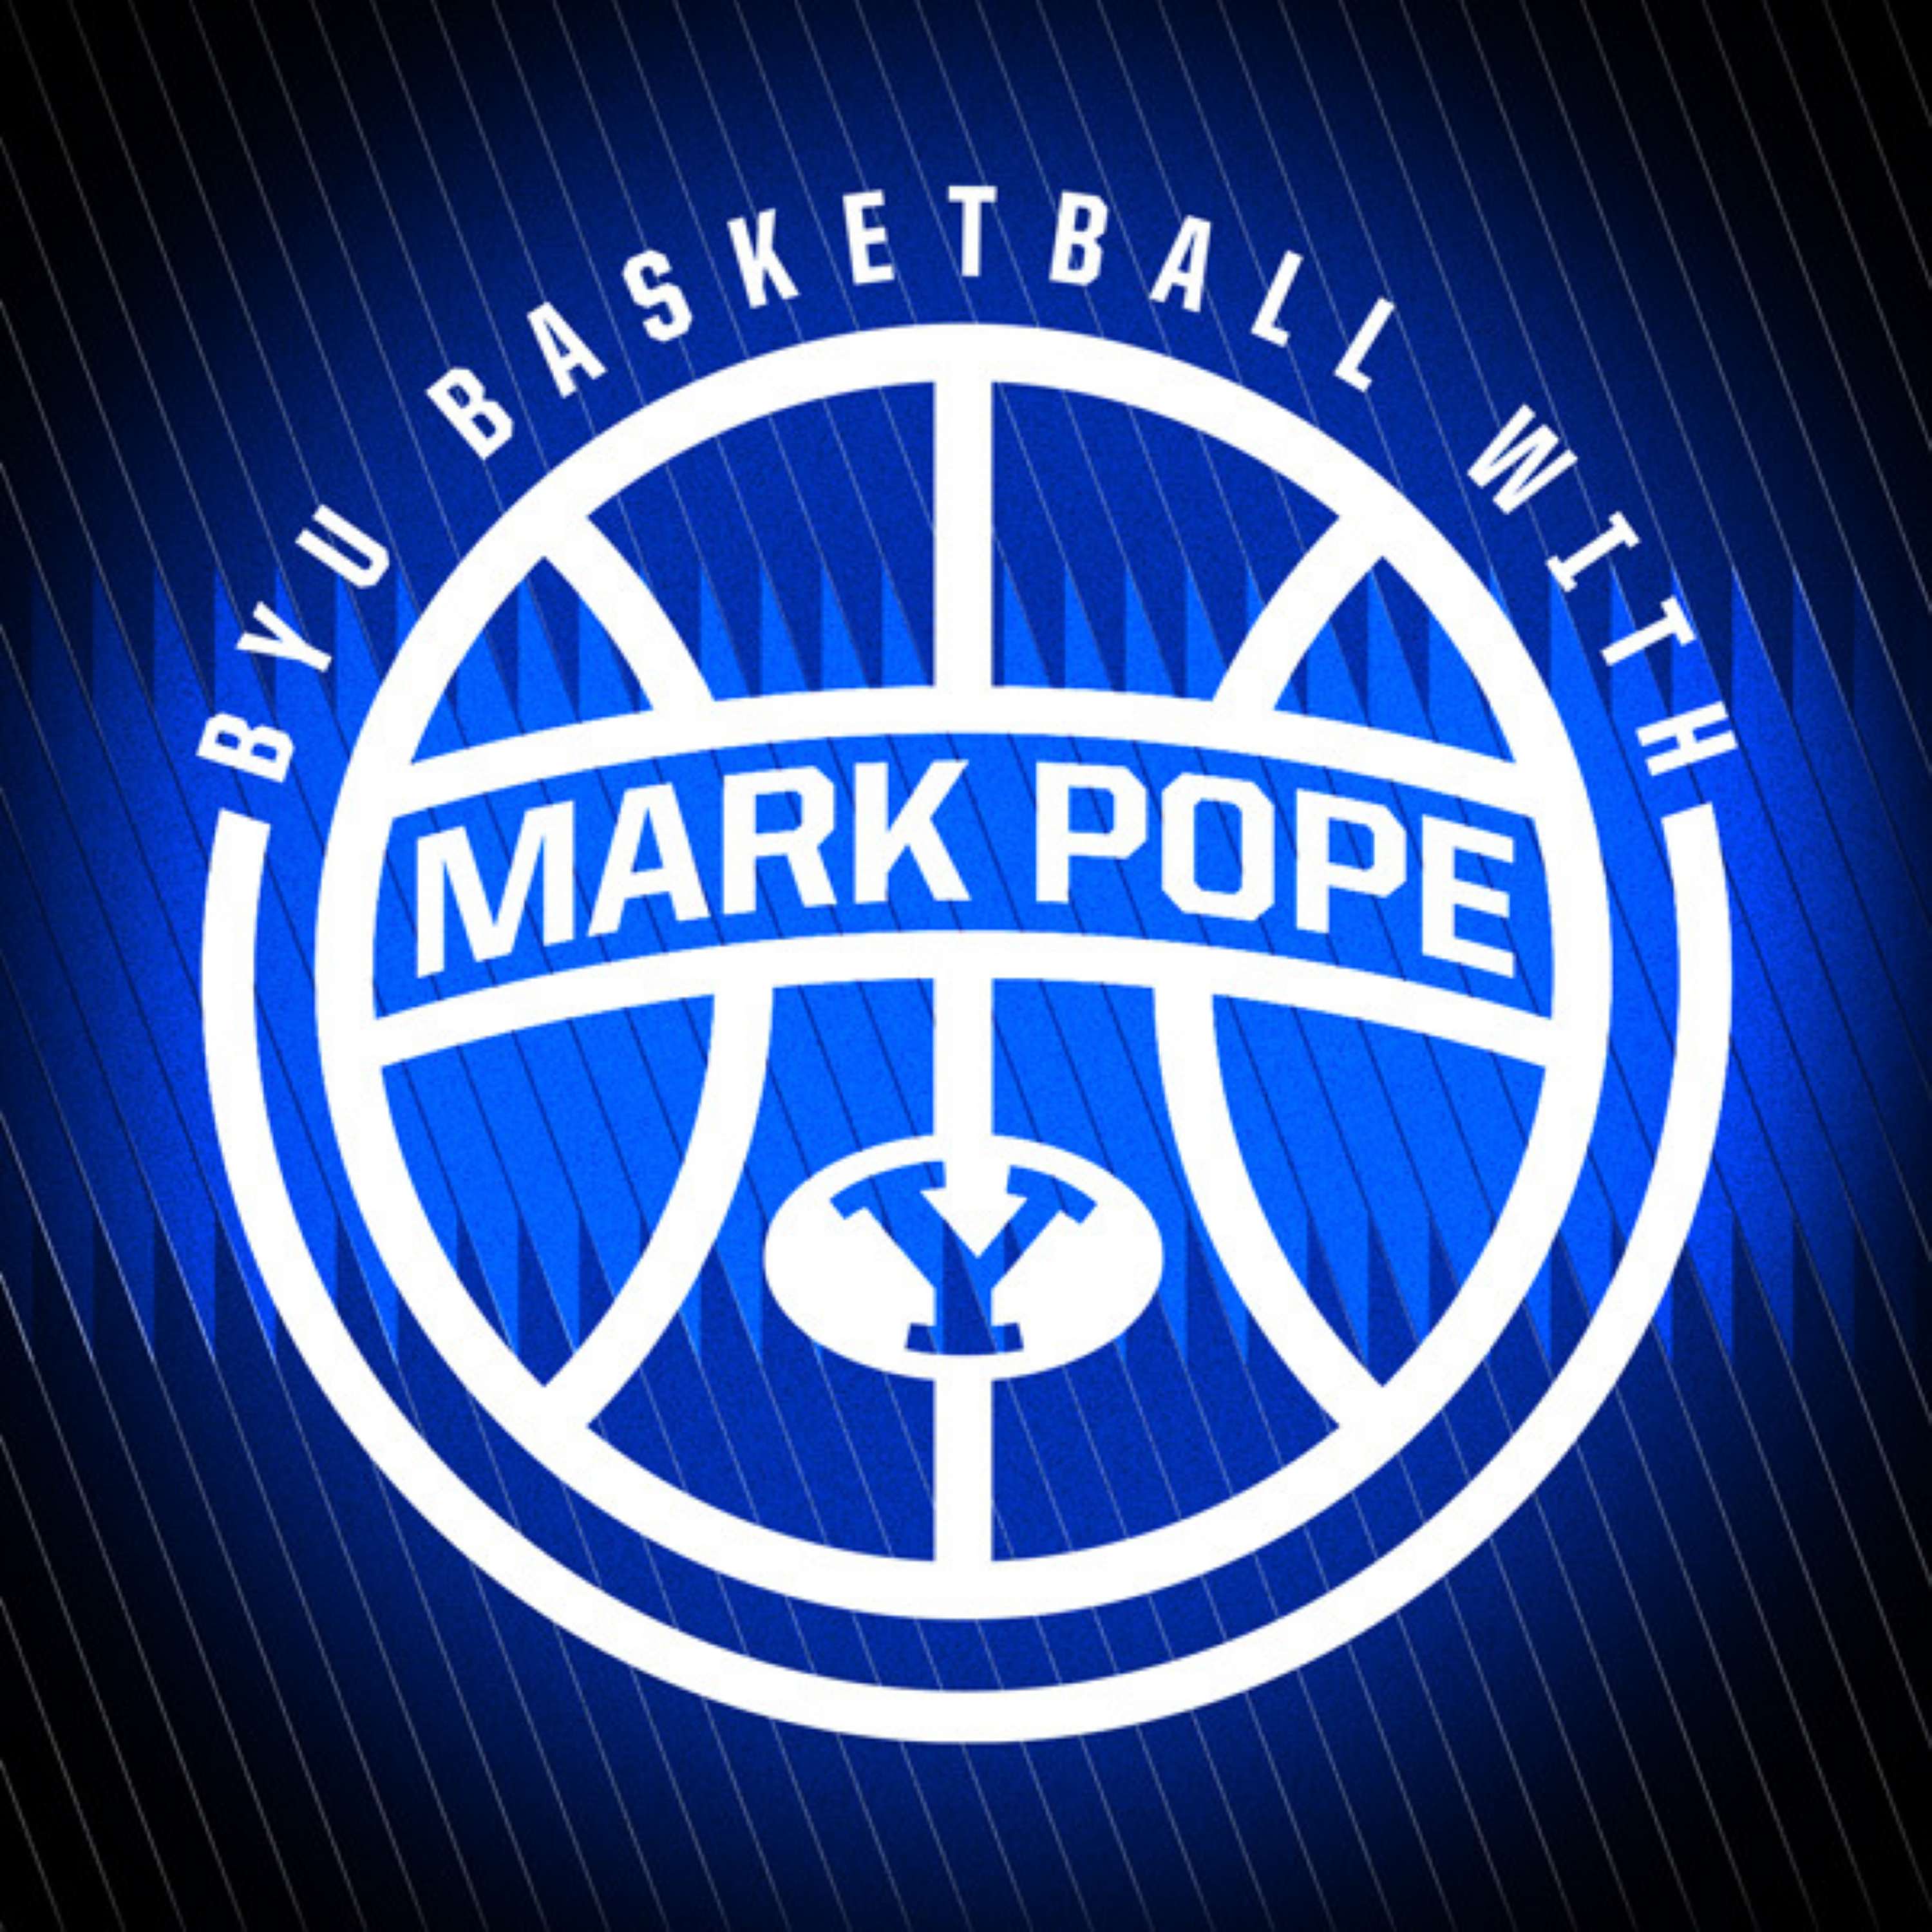 BYU Basketball with Mark Pope